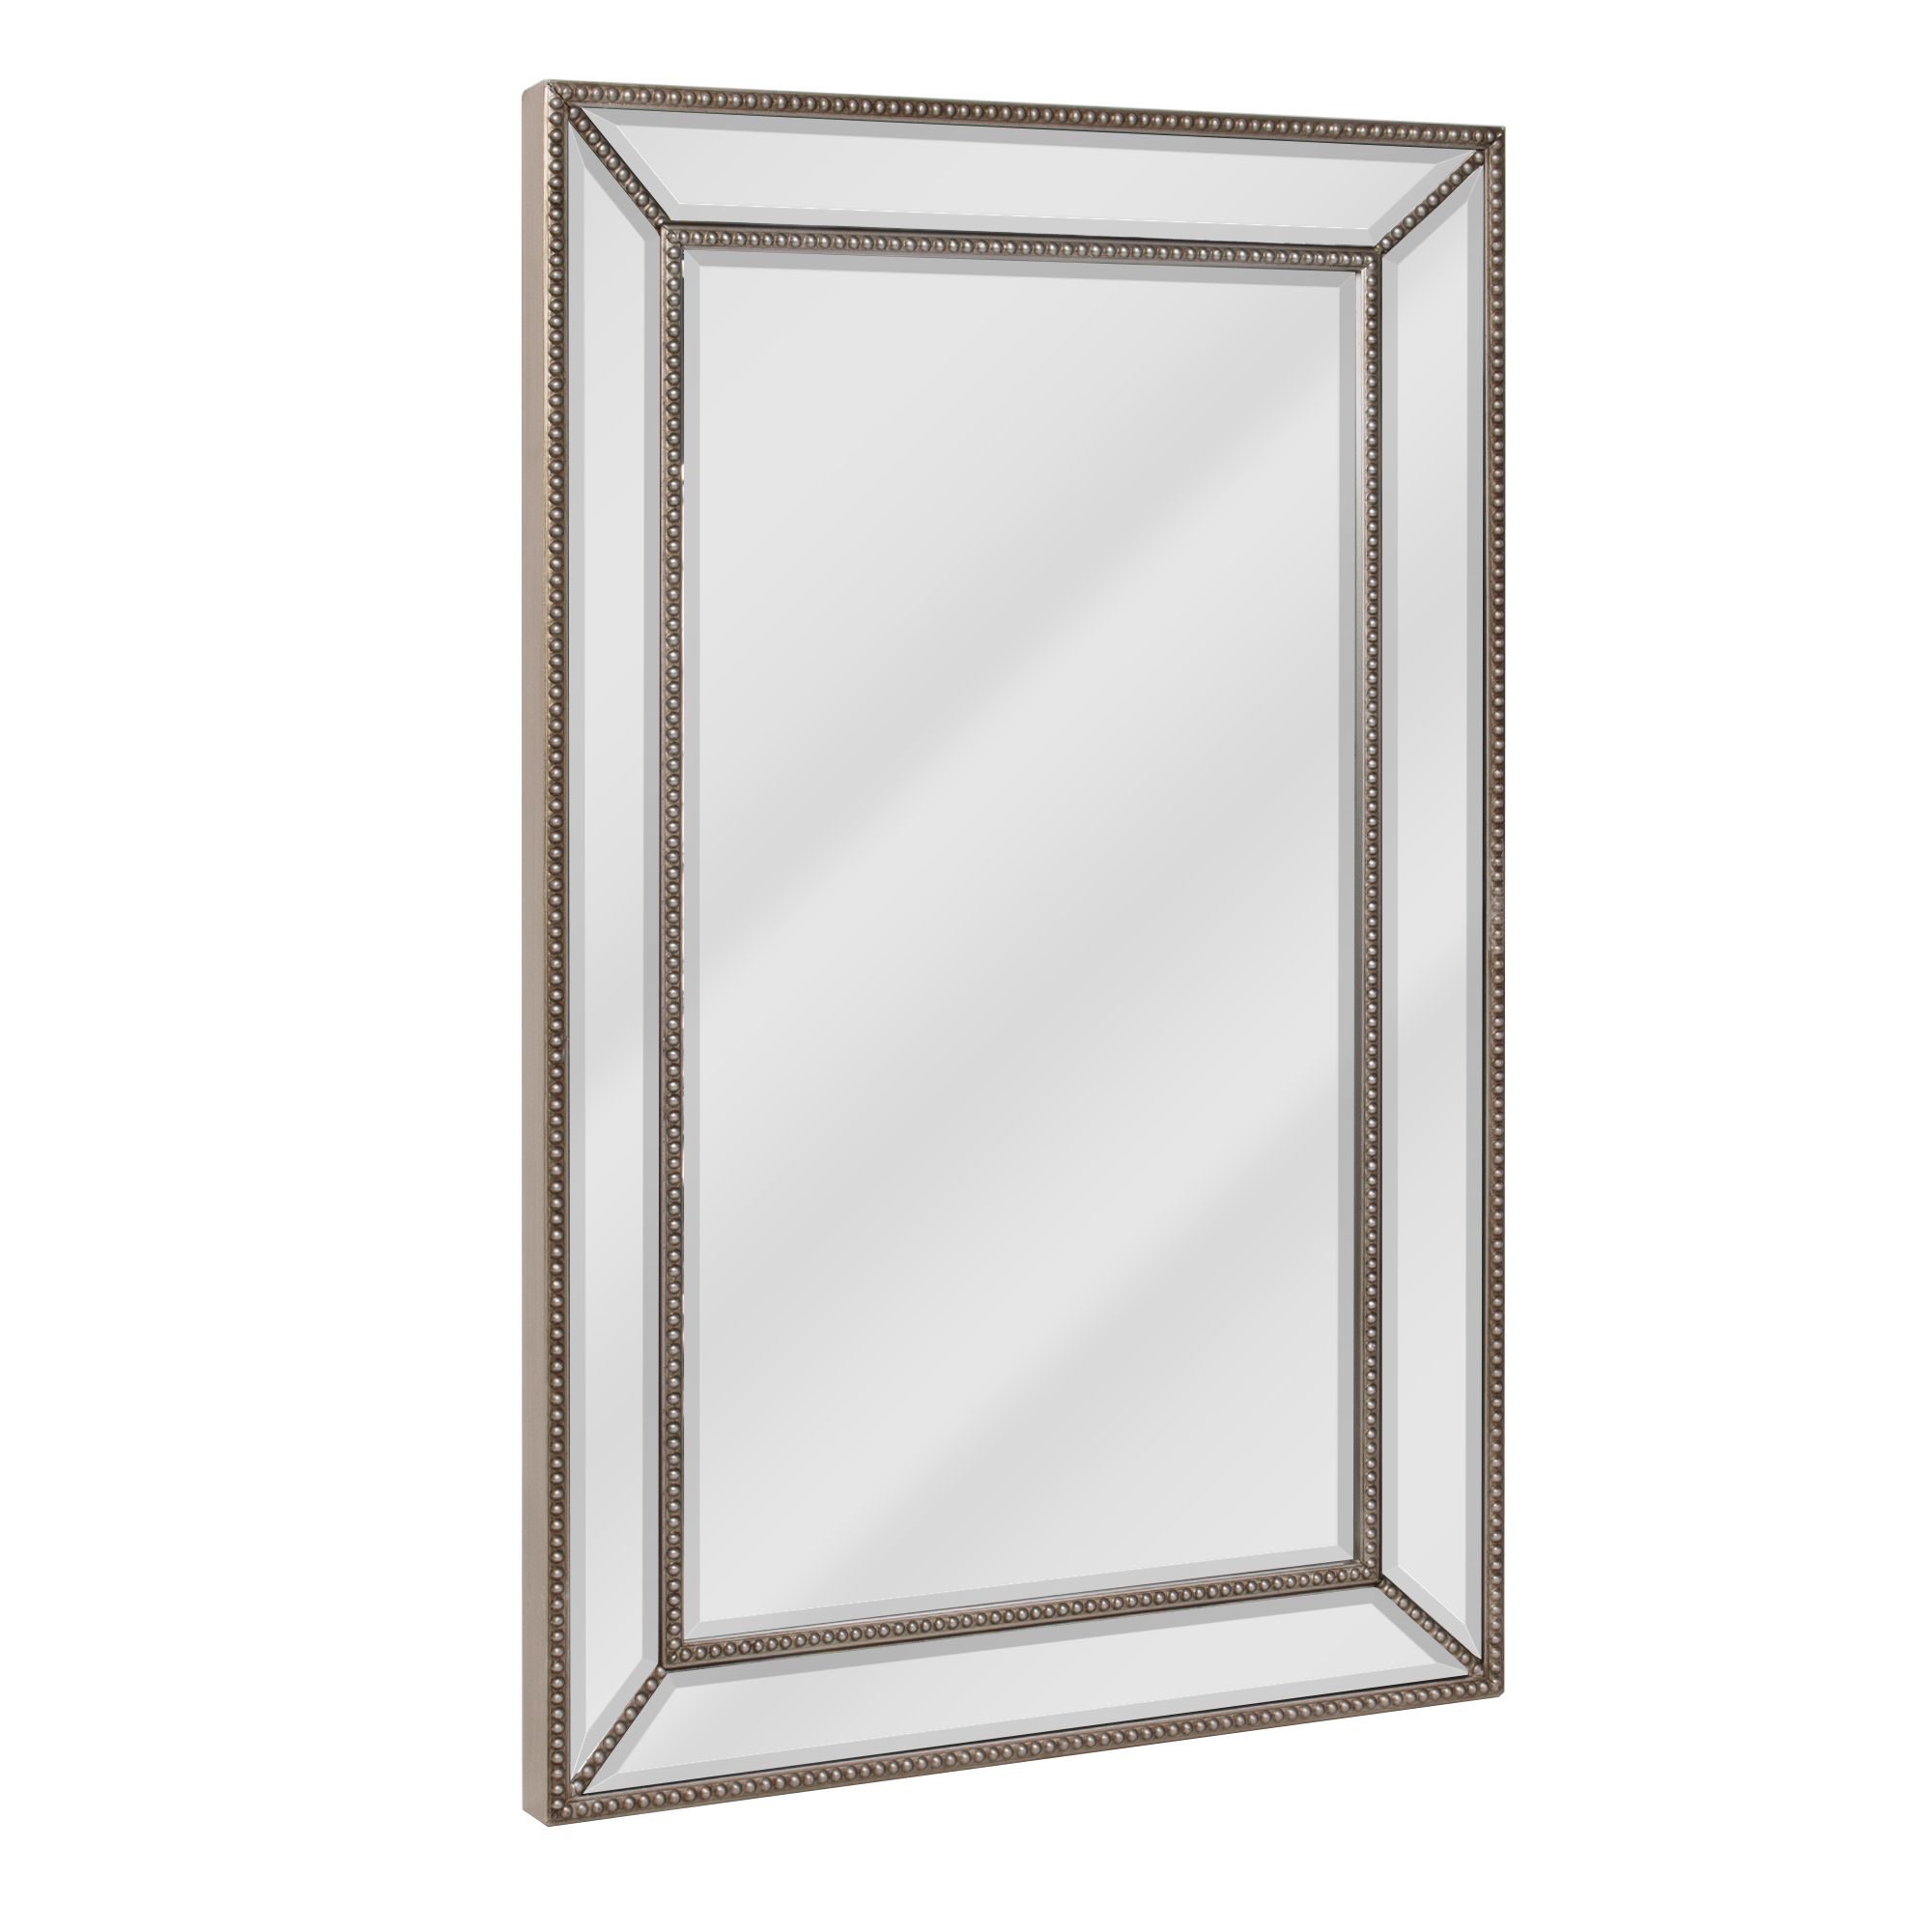 Head West Champagne Silver Beaded Glass Rectangular Framed Beveled Intended For Lugo Rectangle Accent Mirrors (View 10 of 15)